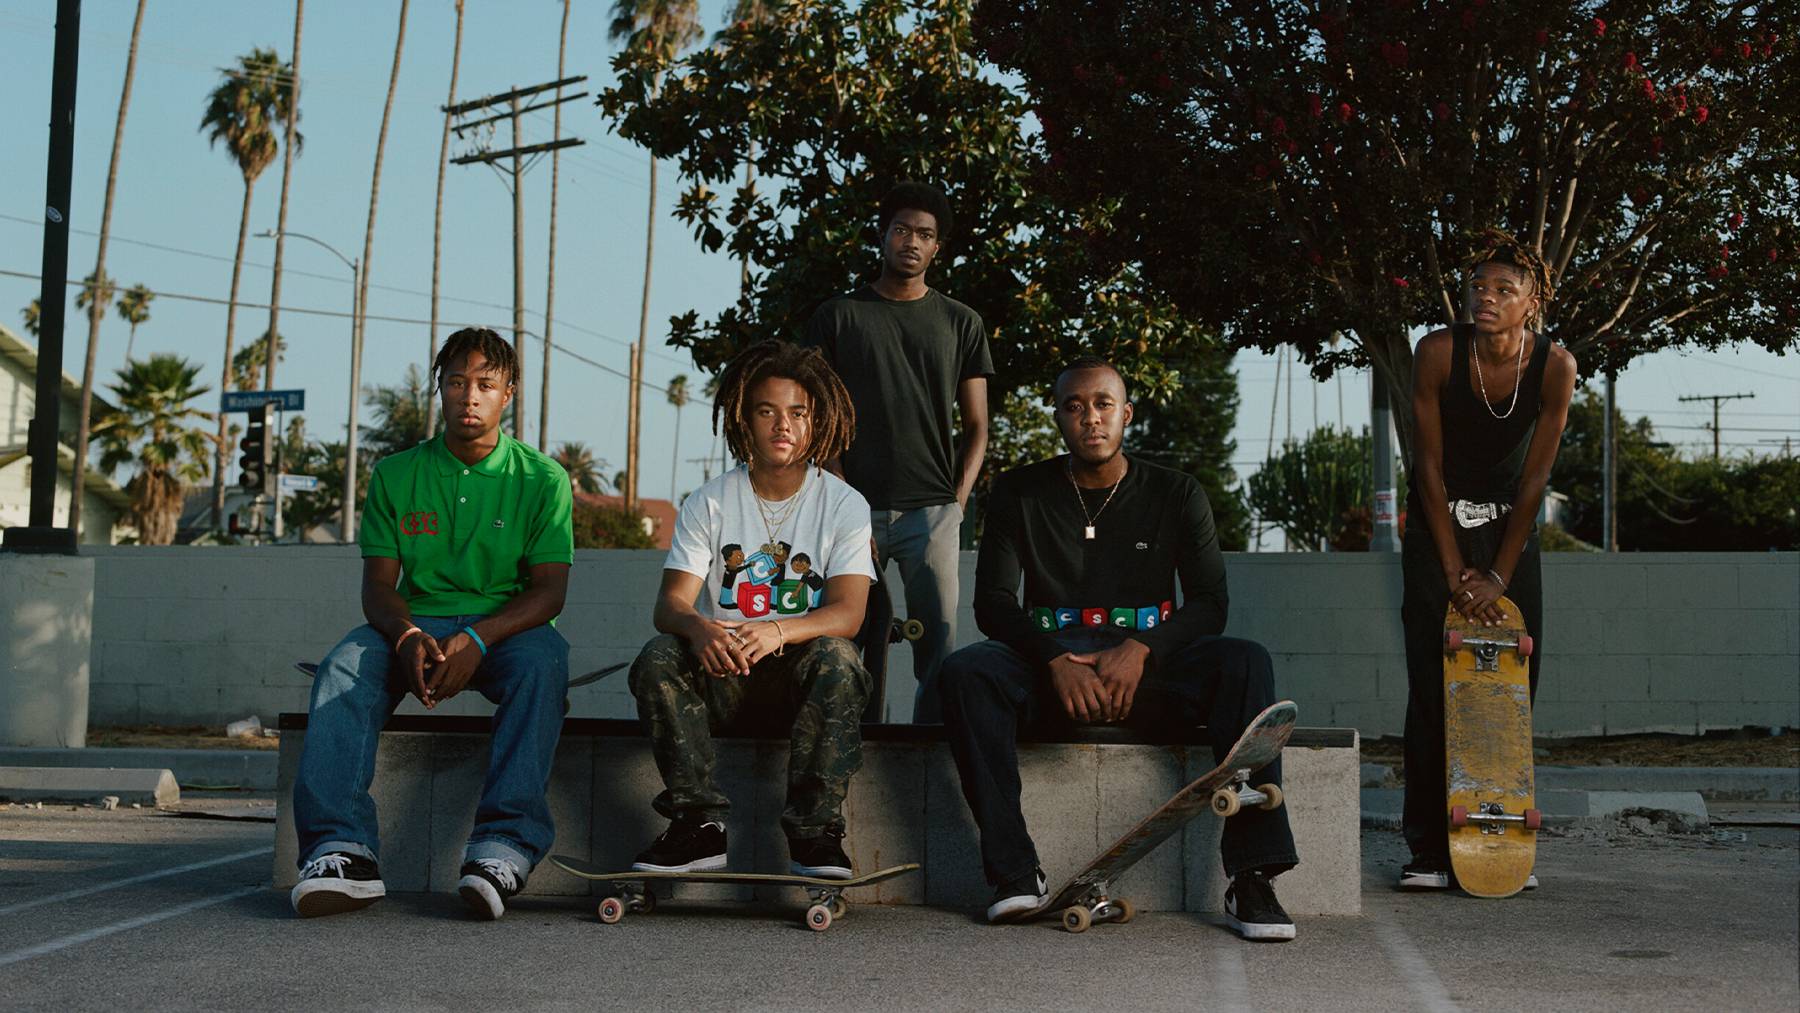 Tobias McIntosh has turned Crenshaw Skate Club, a streetwear business he started when he was just 14, into a small but fast-growing skater brand with fans like Justin Bieber. Tim Hans.